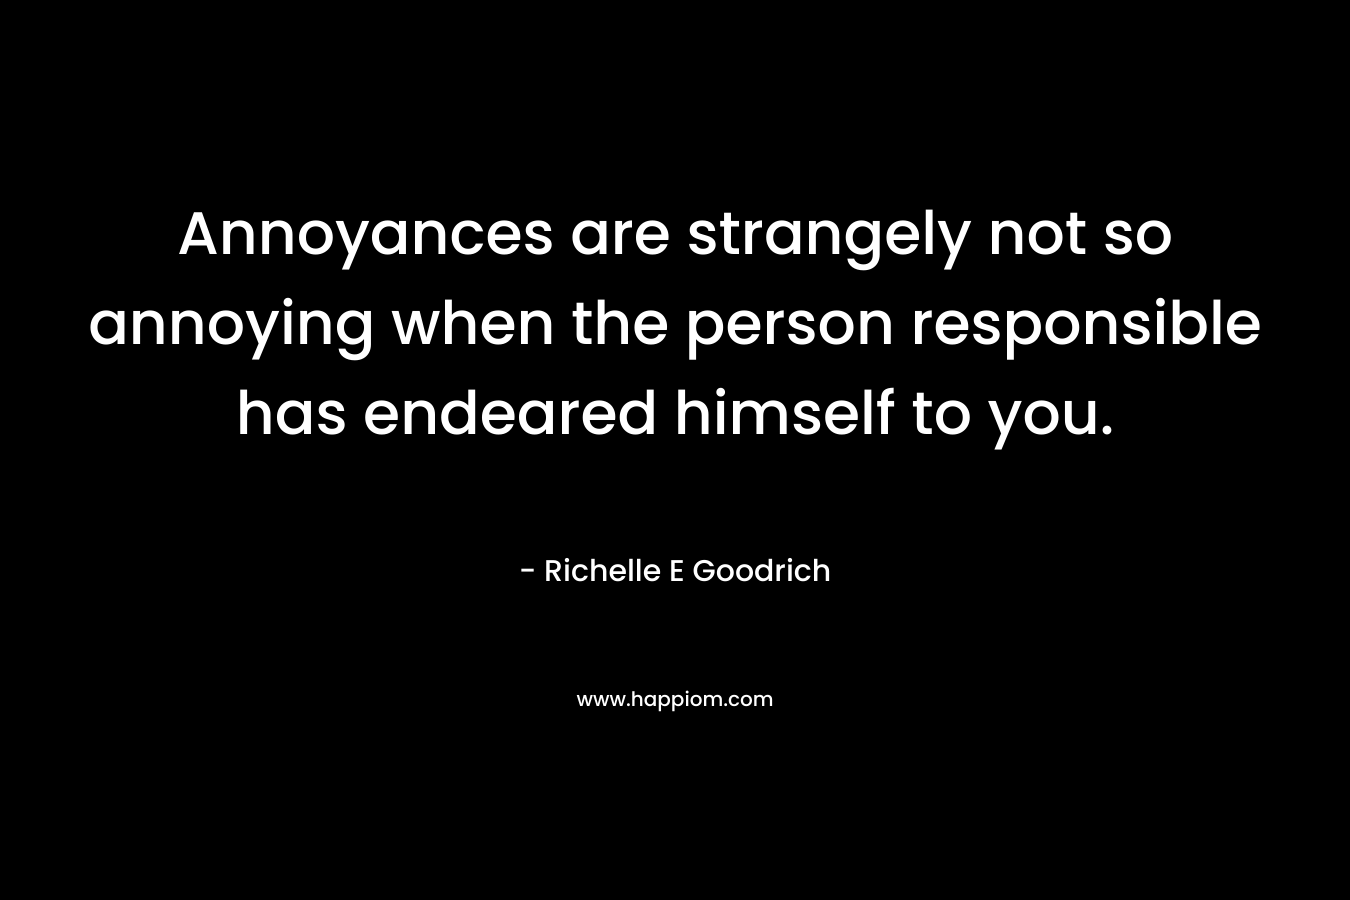 Annoyances are strangely not so annoying when the person responsible has endeared himself to you.